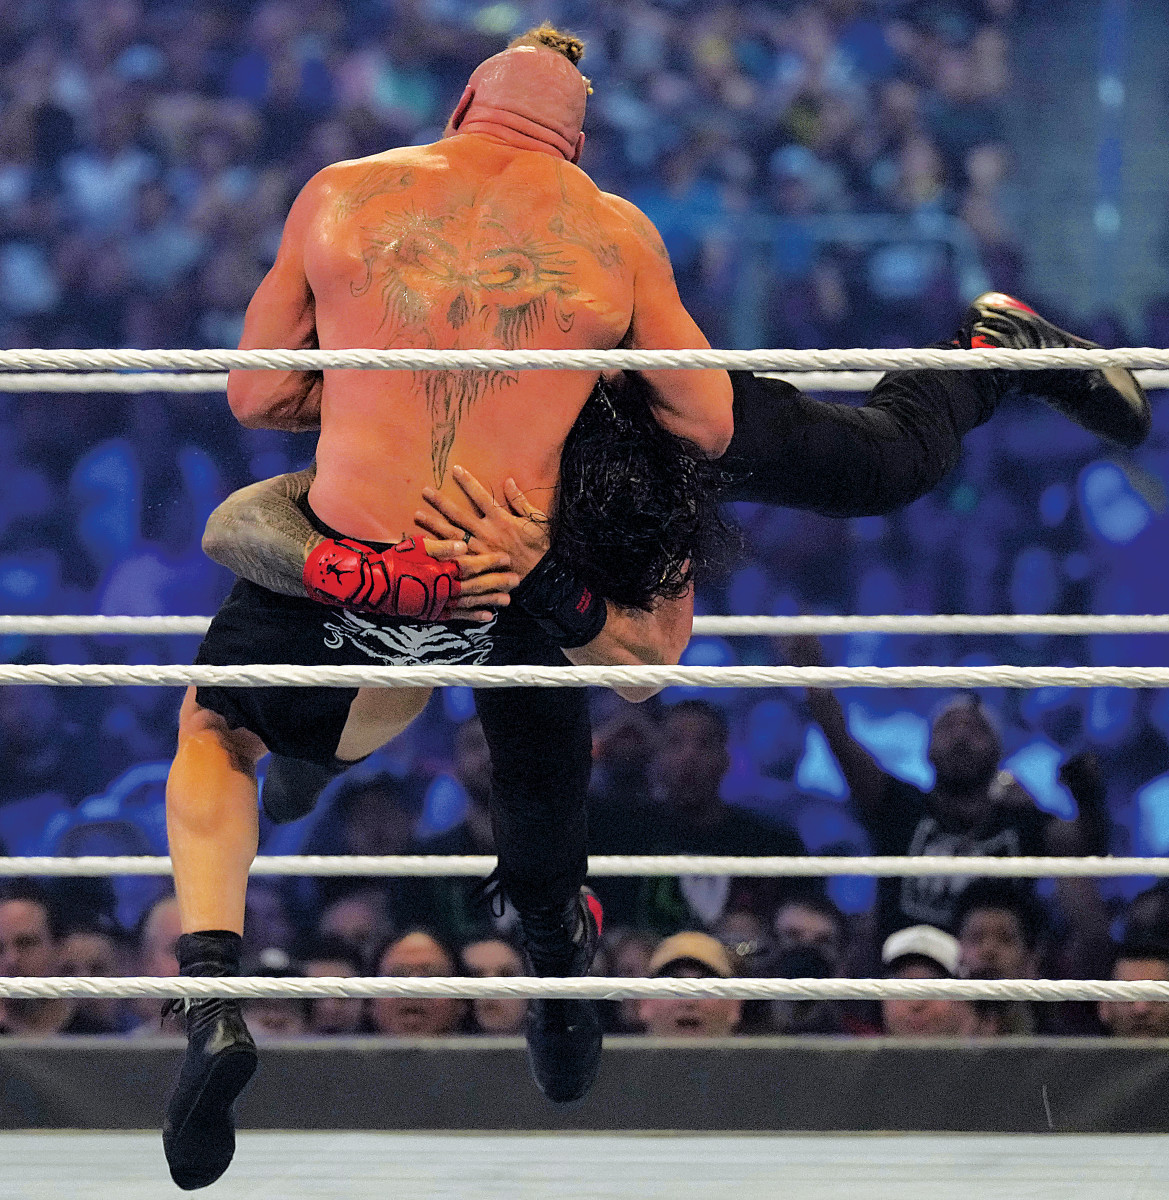 WWE champion Brock Lesnar hits Universal champion Roman Reigns with an F5 during their champion vs. champion match at Wrestlemania 38 in AT&T Stadium in Arlington, Texas.